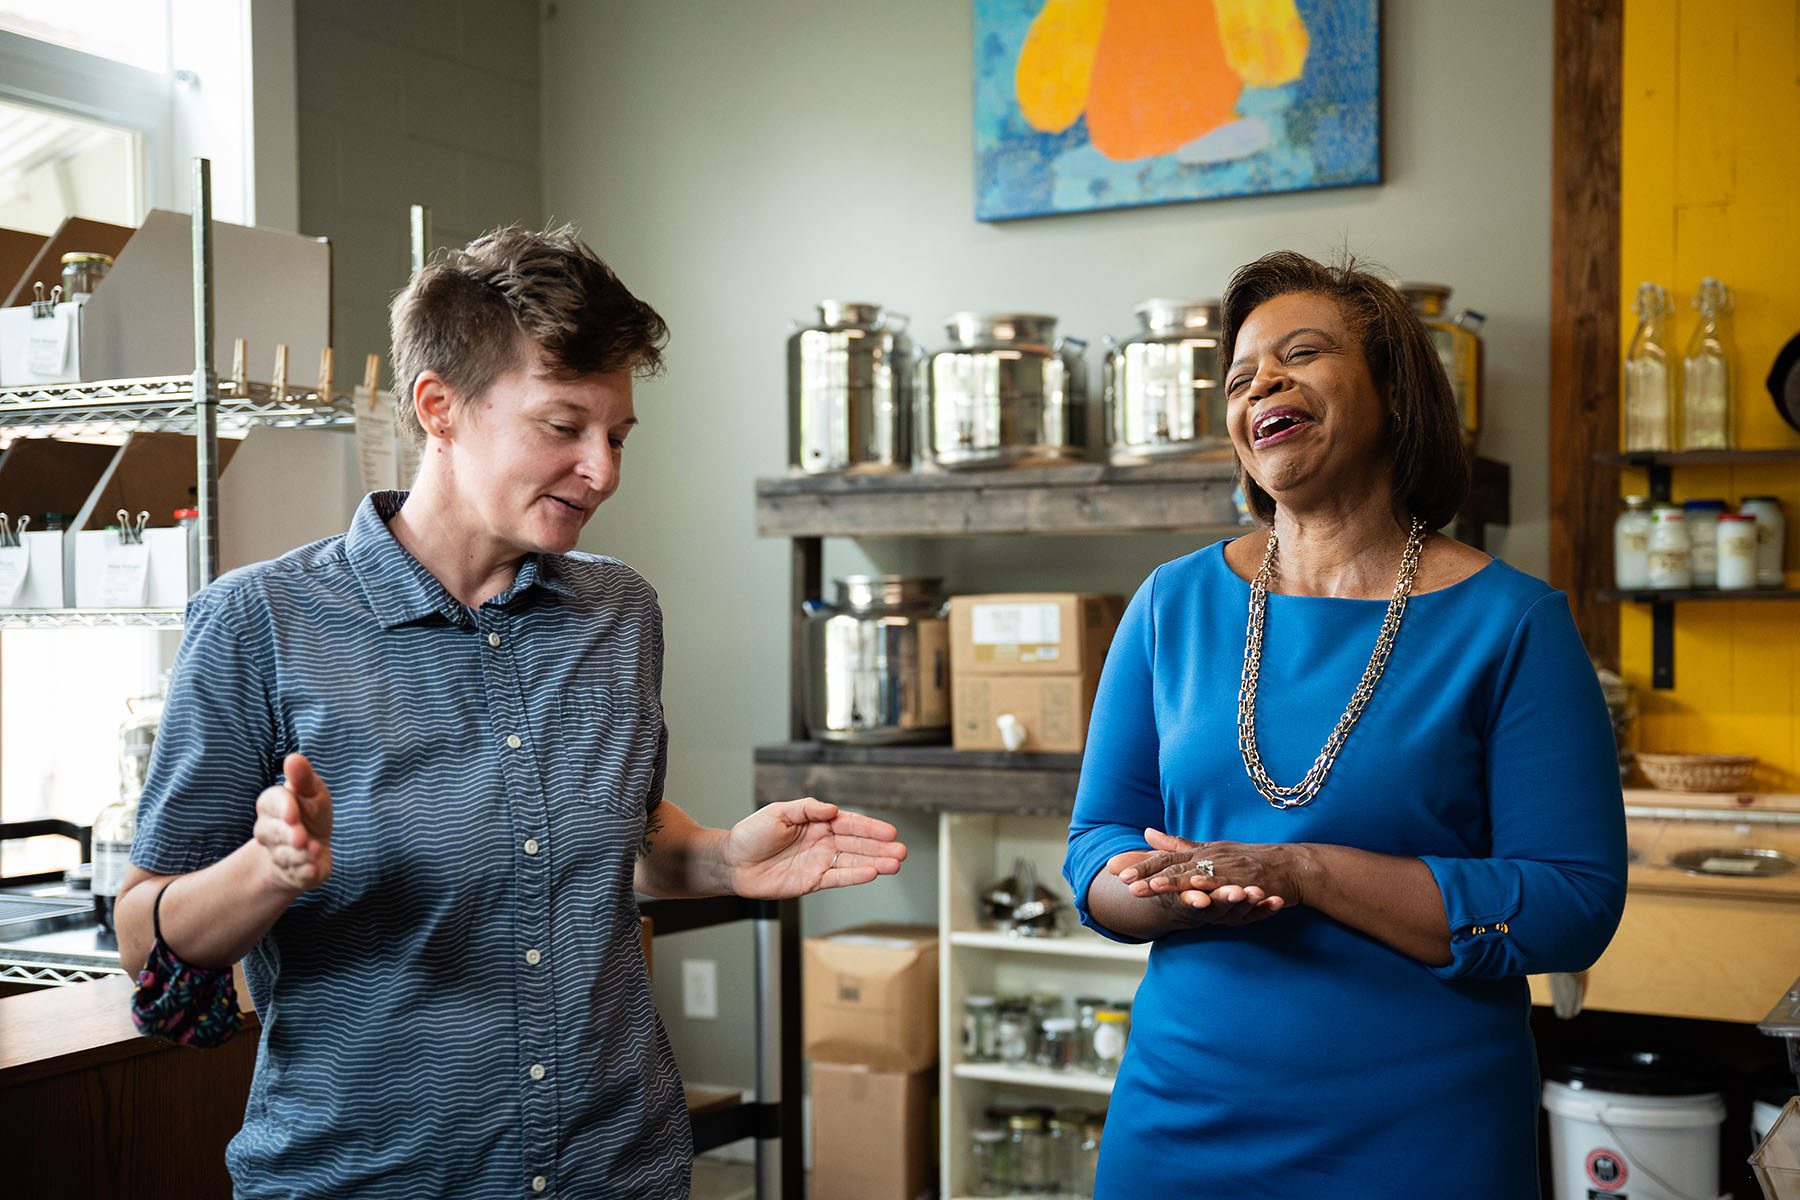 Cheri Beasley shares a laugh with the owner of Part & Parcel while visiting the grocery store.